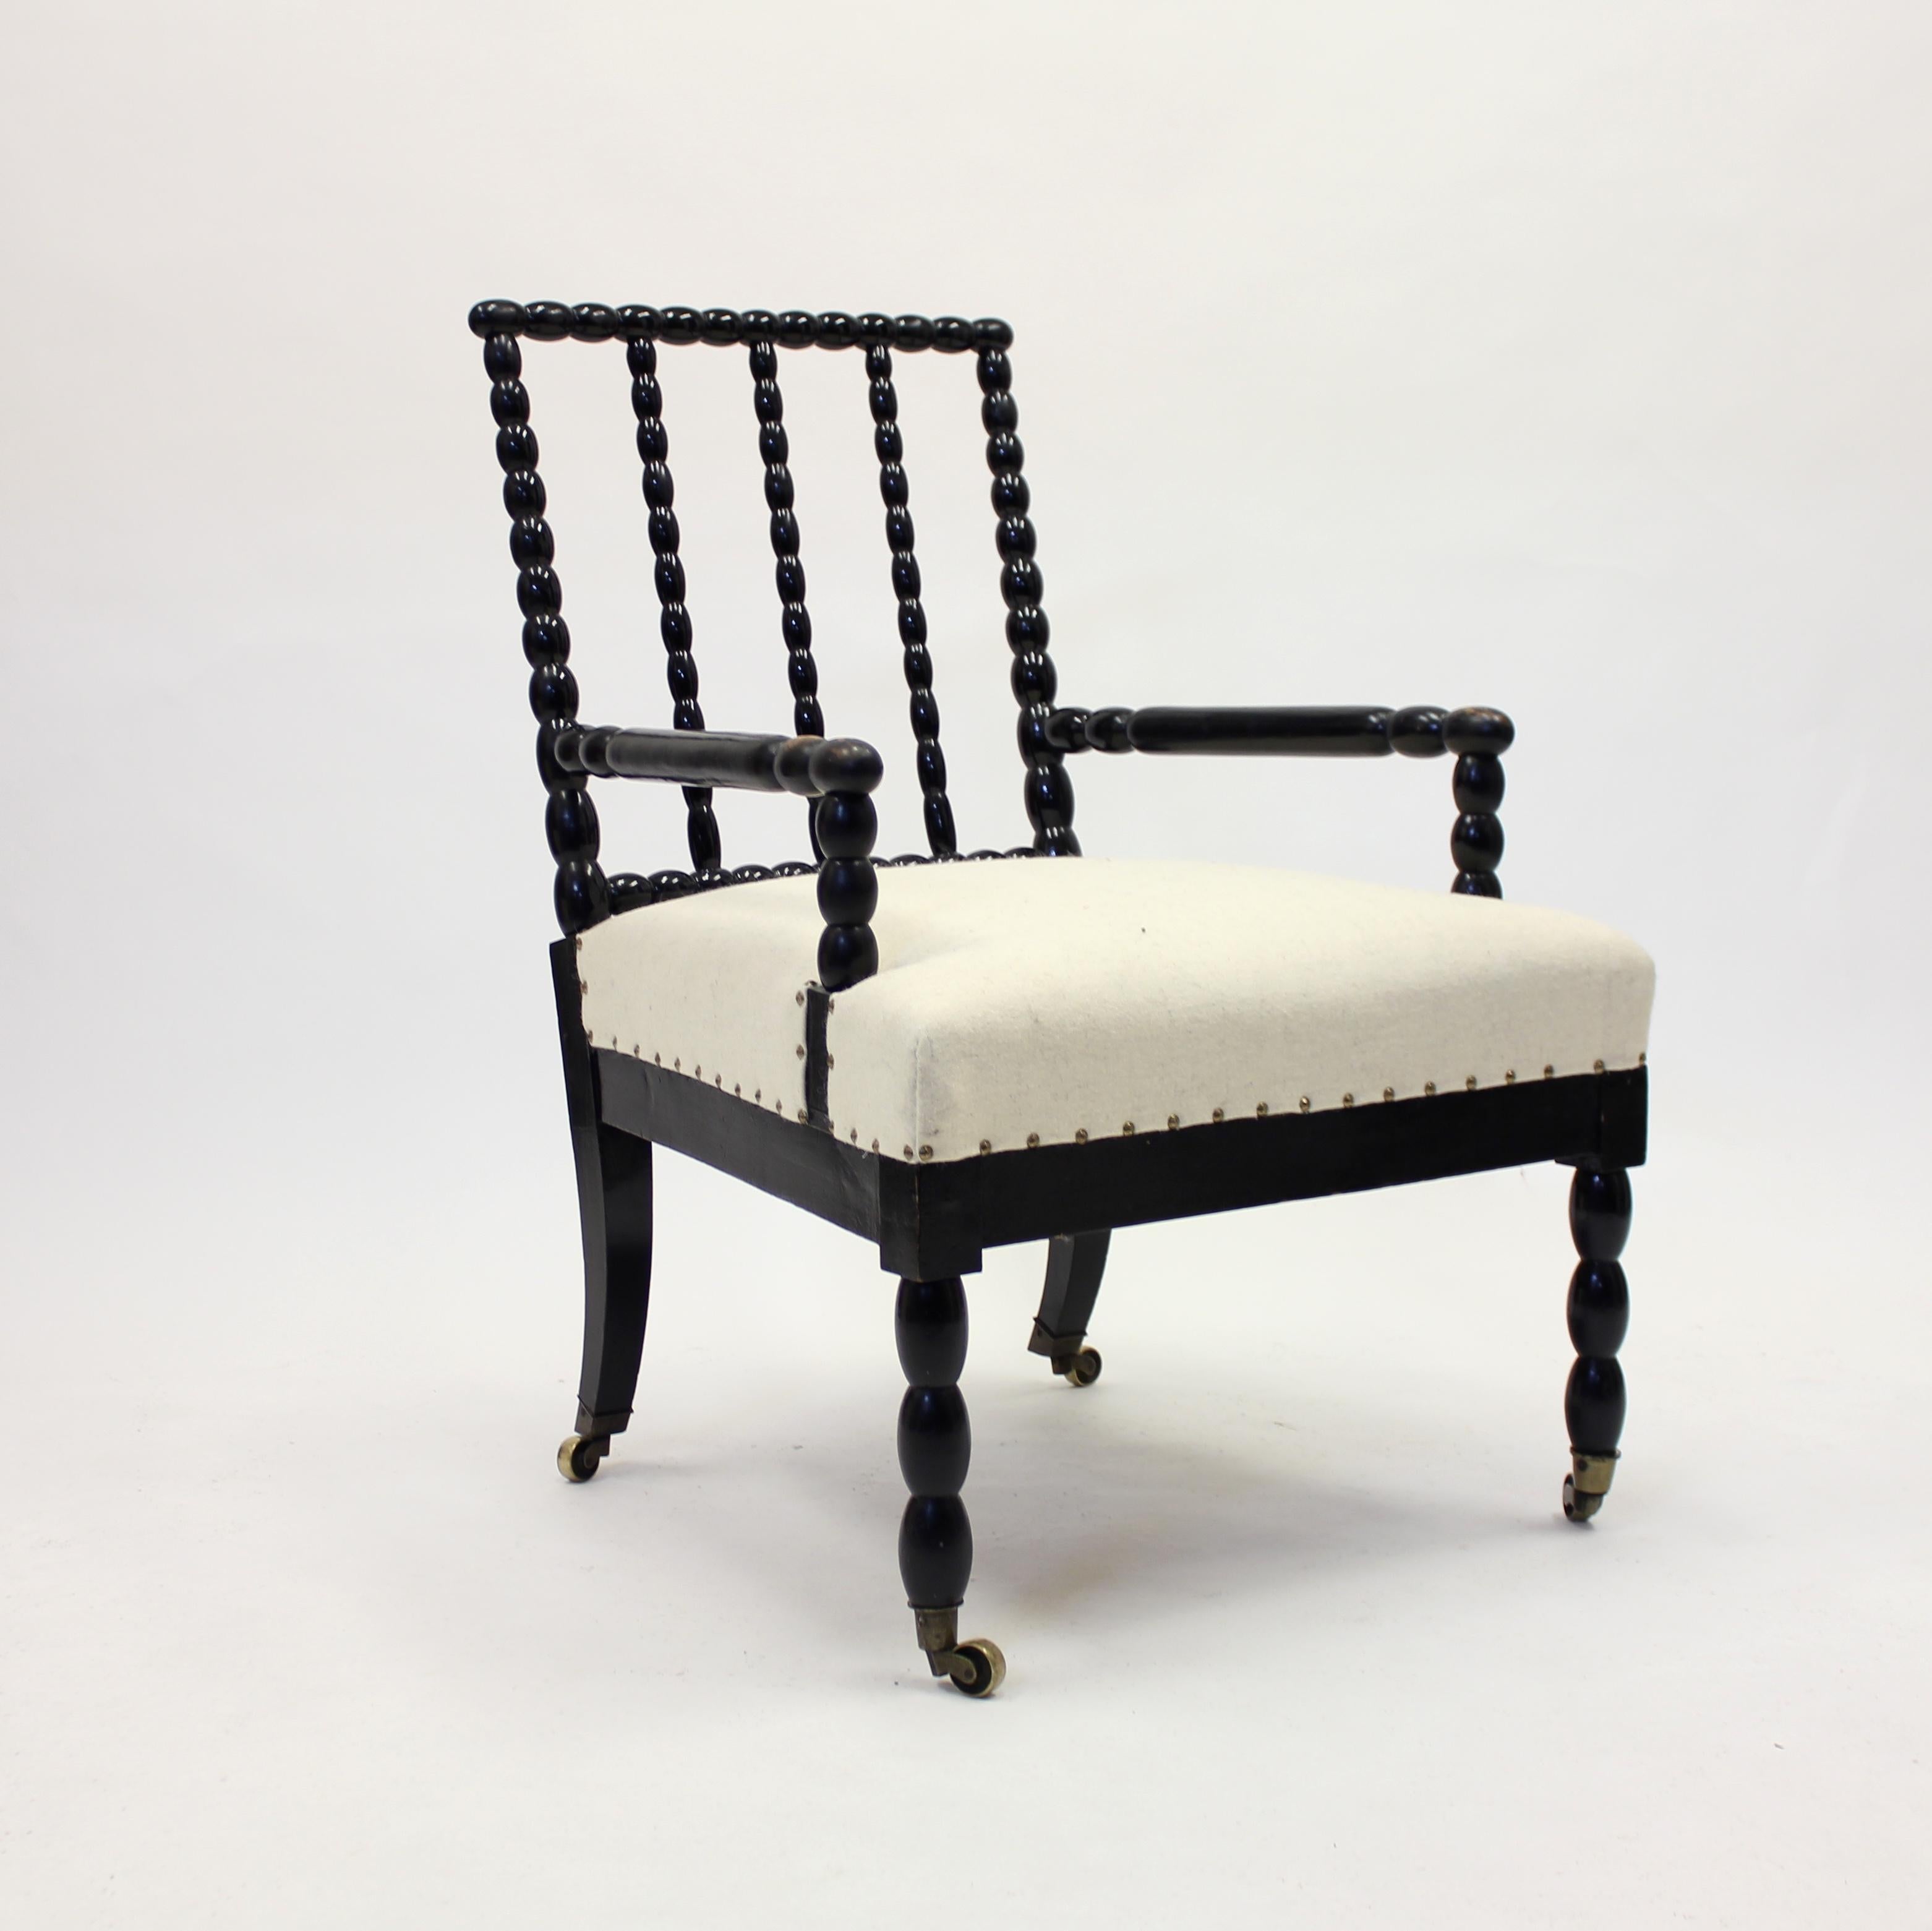 Antique ebonized bobbin turned chair, from later part ot the 19th century or early part of the 20th century, on brass castors with new off white felt upholstery. The back cushion is removable. Most likely British. Very good vintage condition with